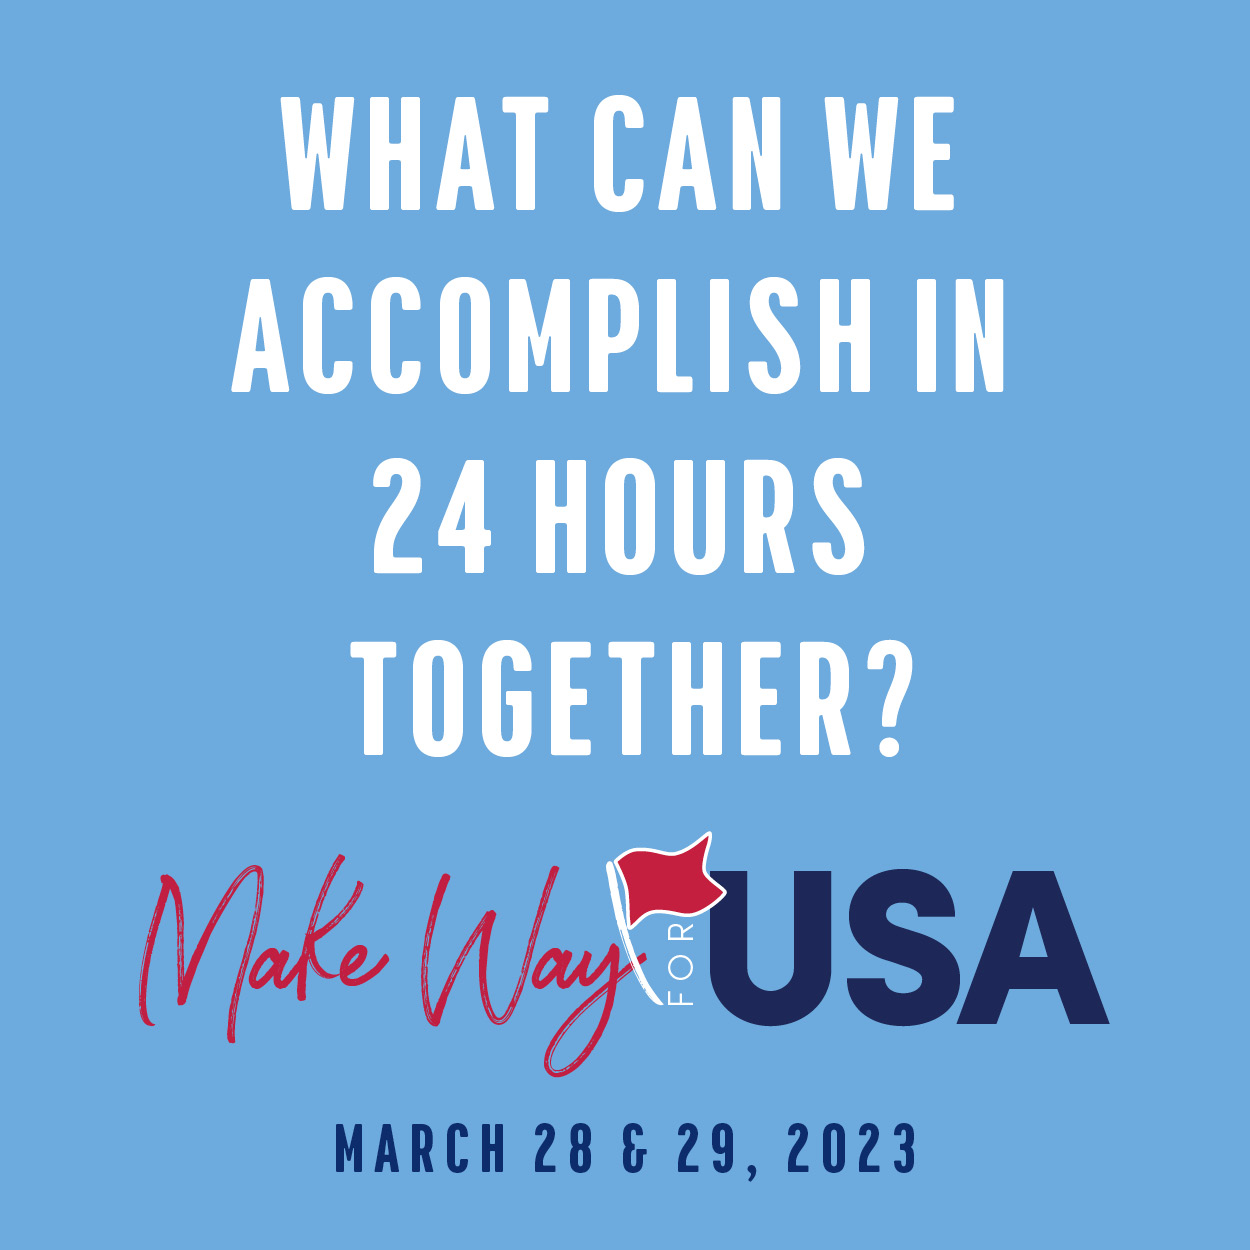 What can we accomplish in 24 hours together? Make Way for USA March 28 and 29, 2023